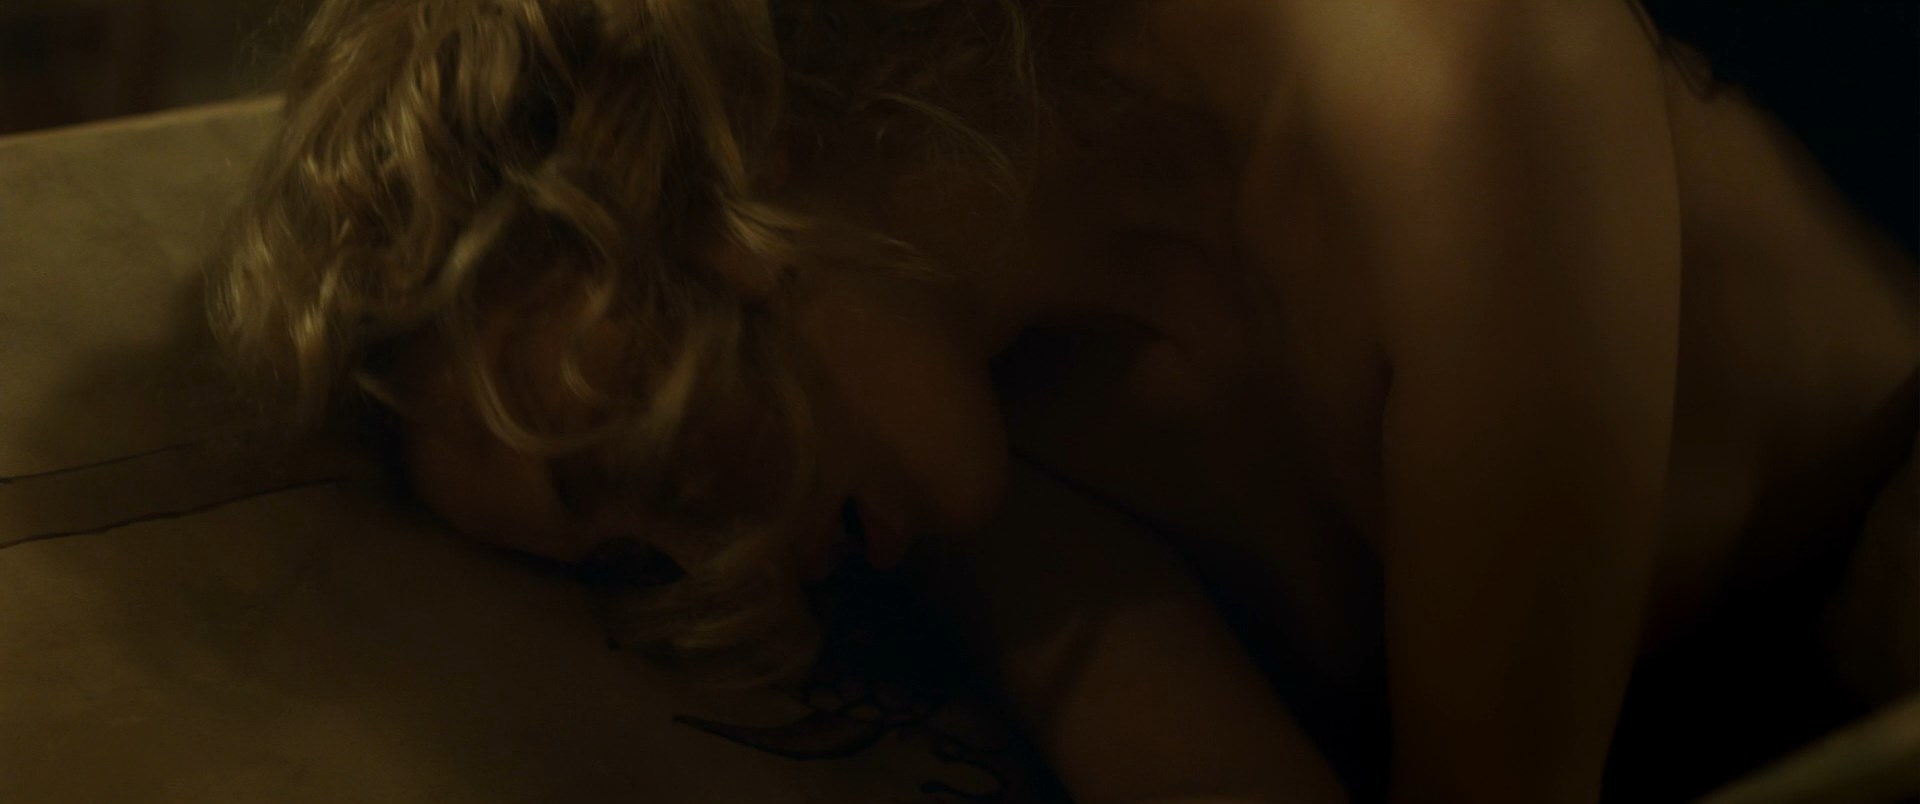 Short lesbian scene with both Sarah and Malin are topless.